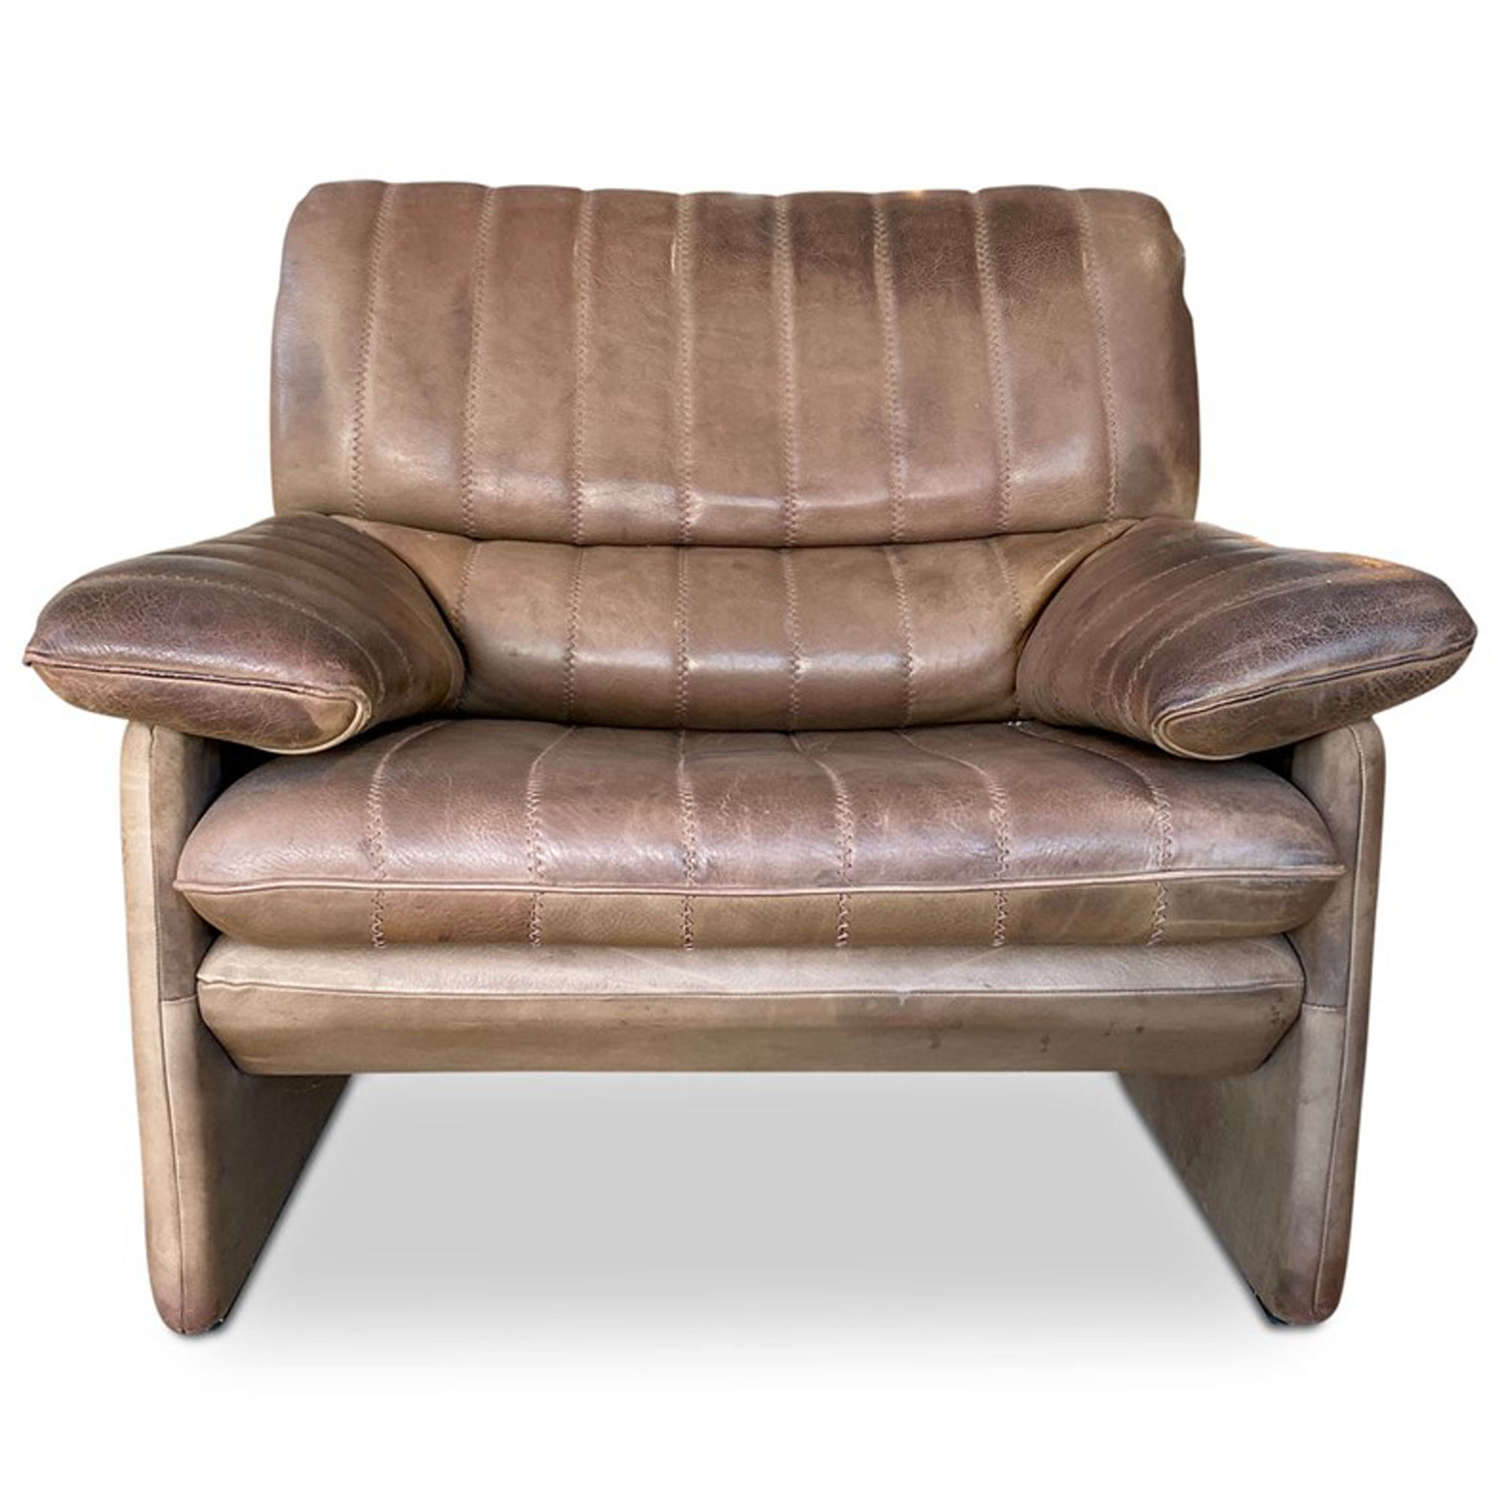 A Pair of De Sede DS-86 Lounge Chair in Soft Thick Brown Neck Leather